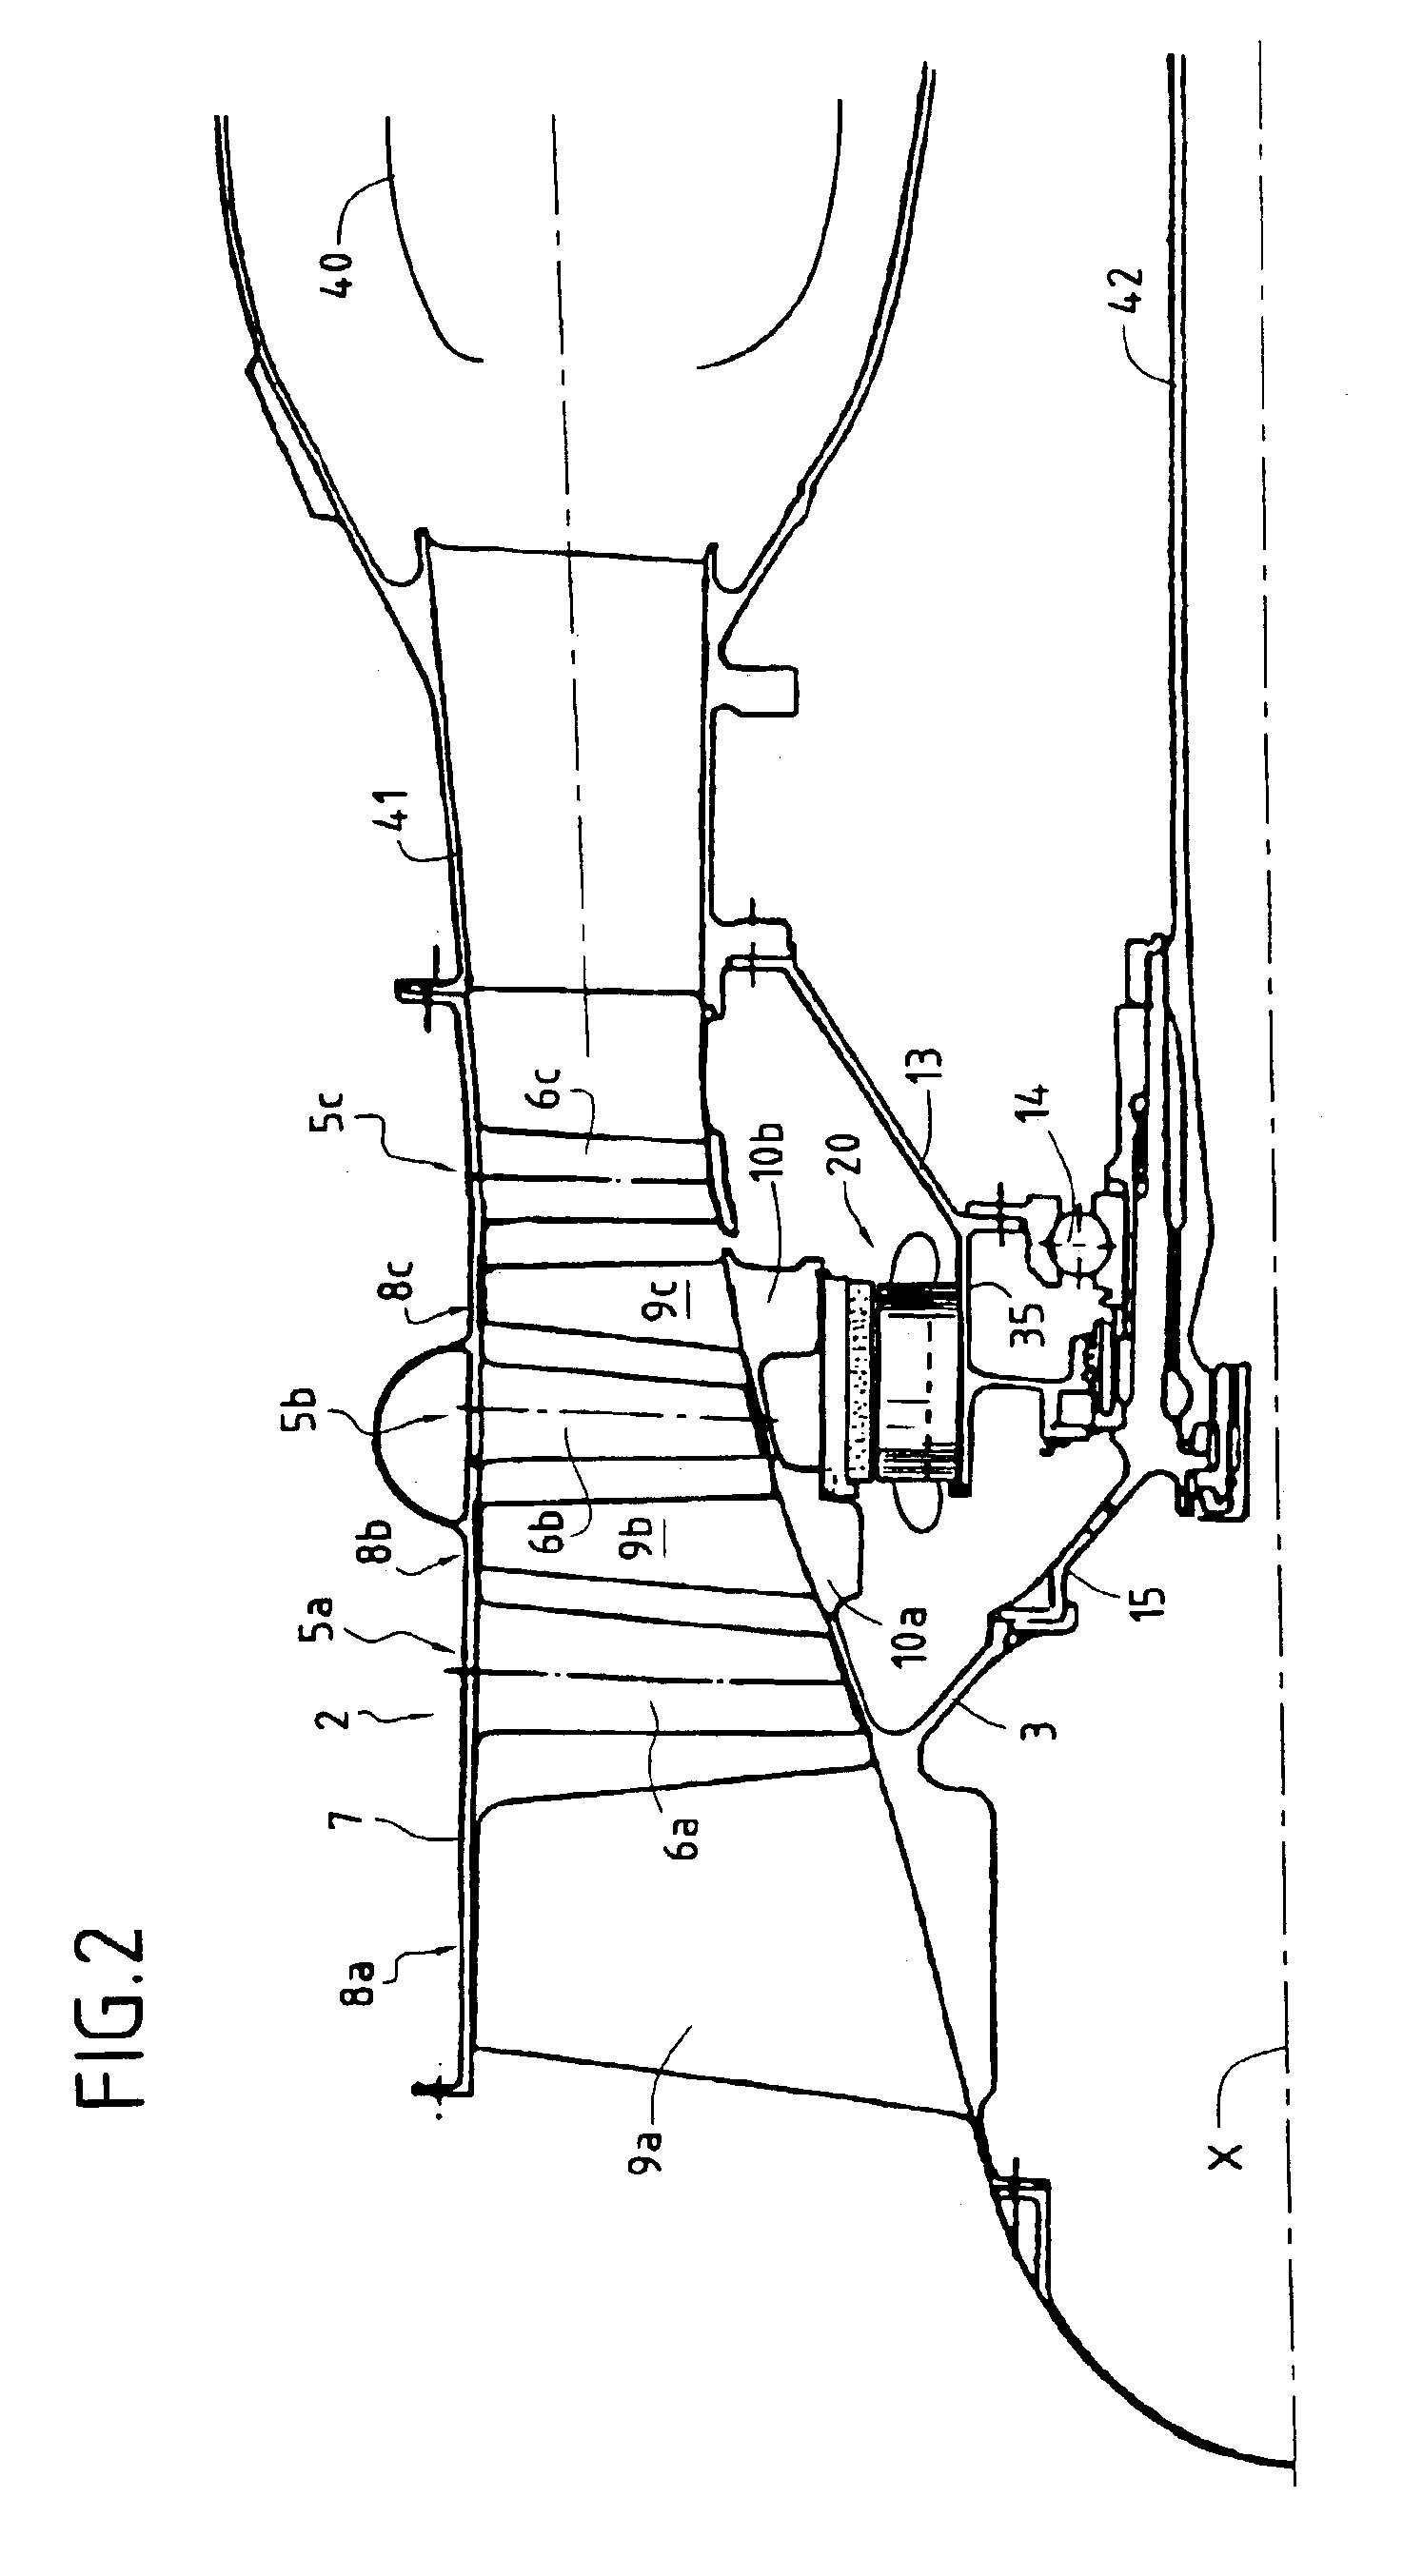 Integrated starter/generator for a turbomachine